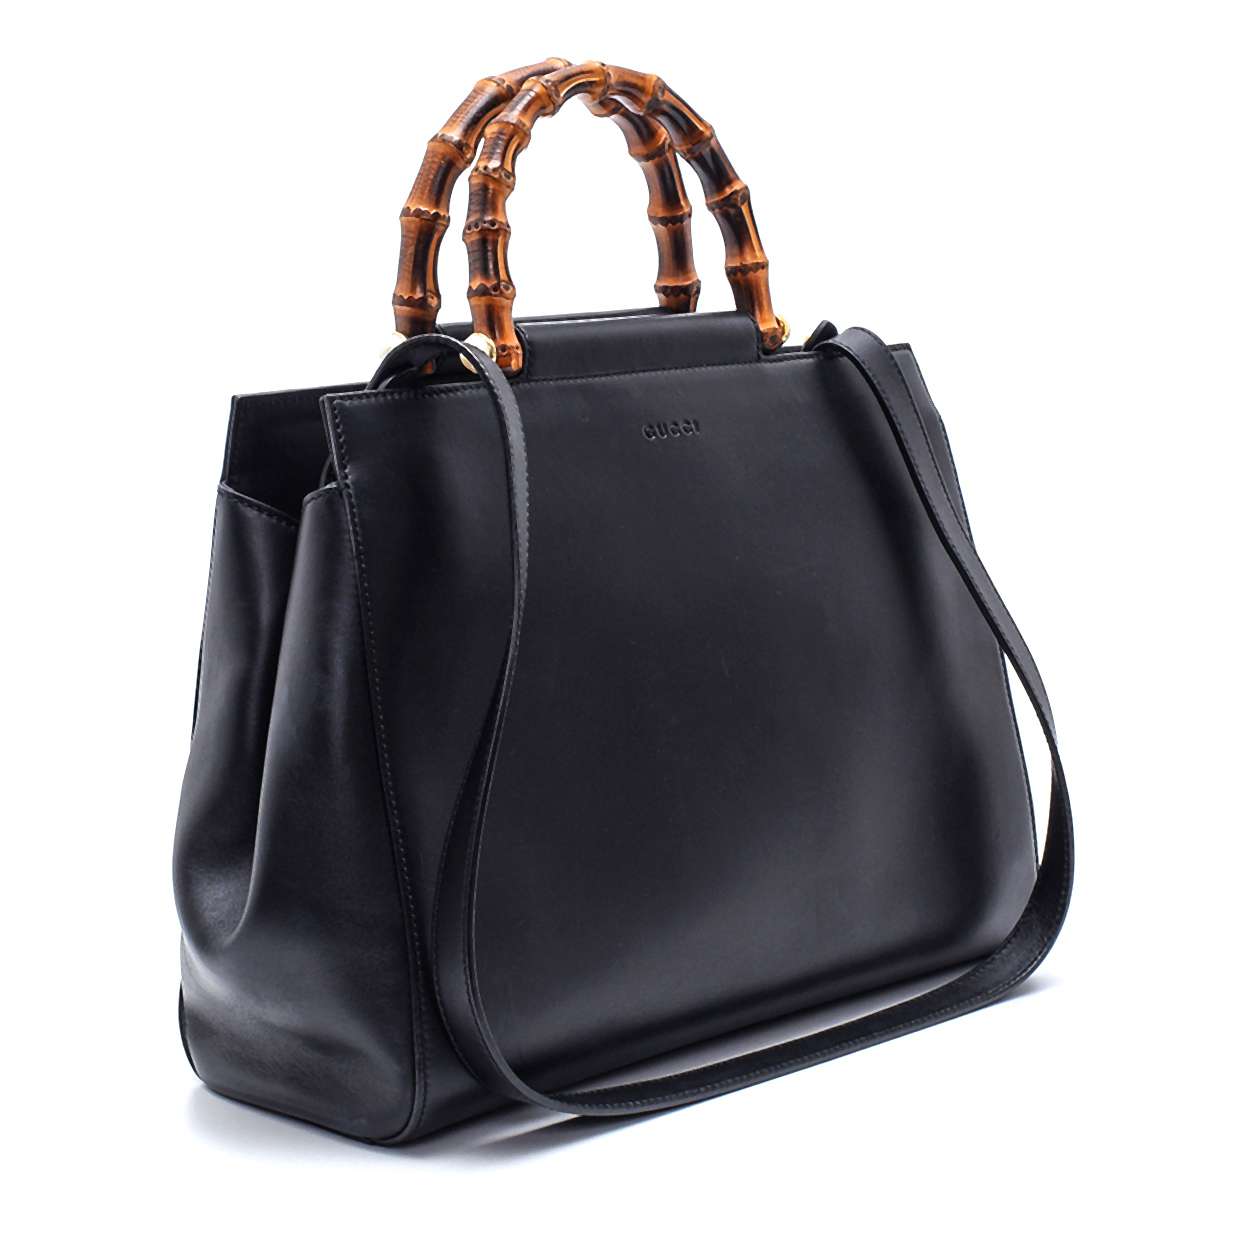 Gucci - Black Bamboo Nymphaea Leather Tote Bag 